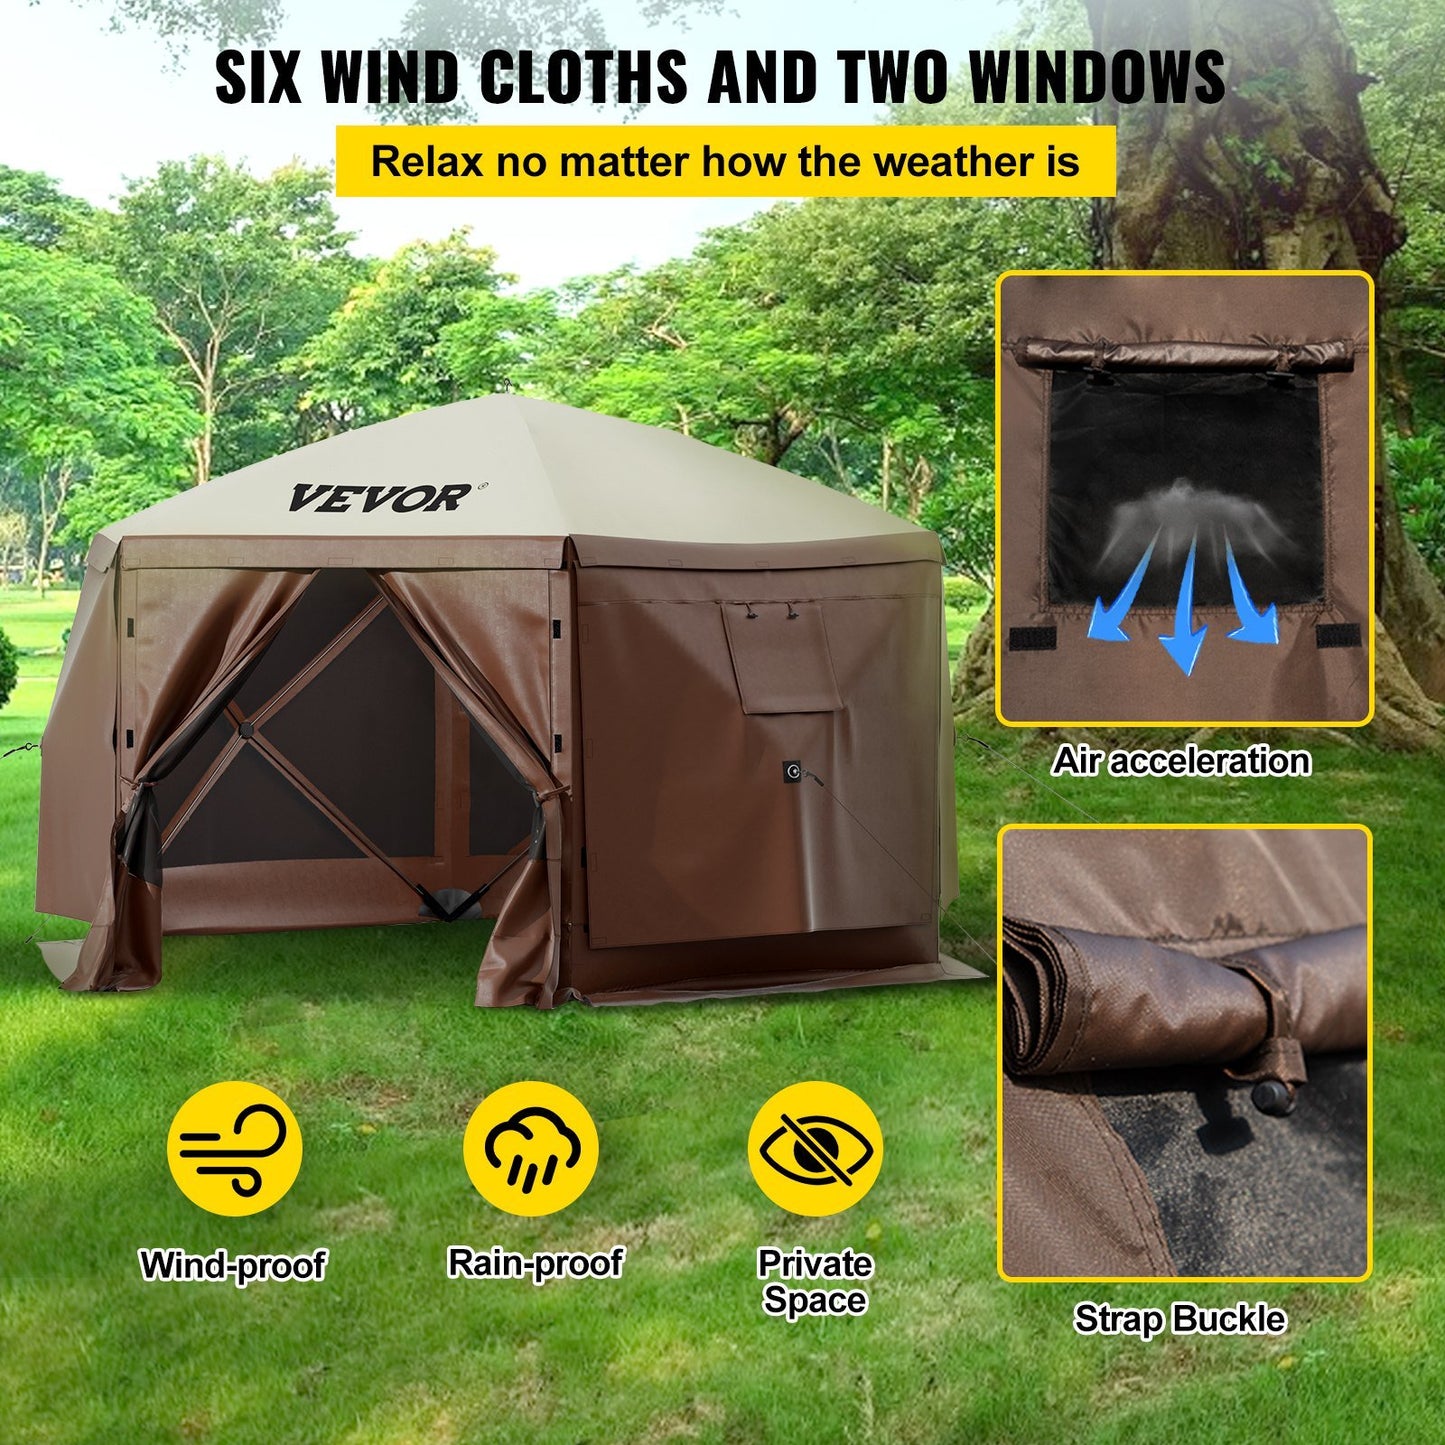 VEVOR Camping Gazebo Screen Tent; 12*12ft; 6 Sided Pop-up Canopy Shelter Tent with Mesh Windows; Portable Carry Bag; Stakes